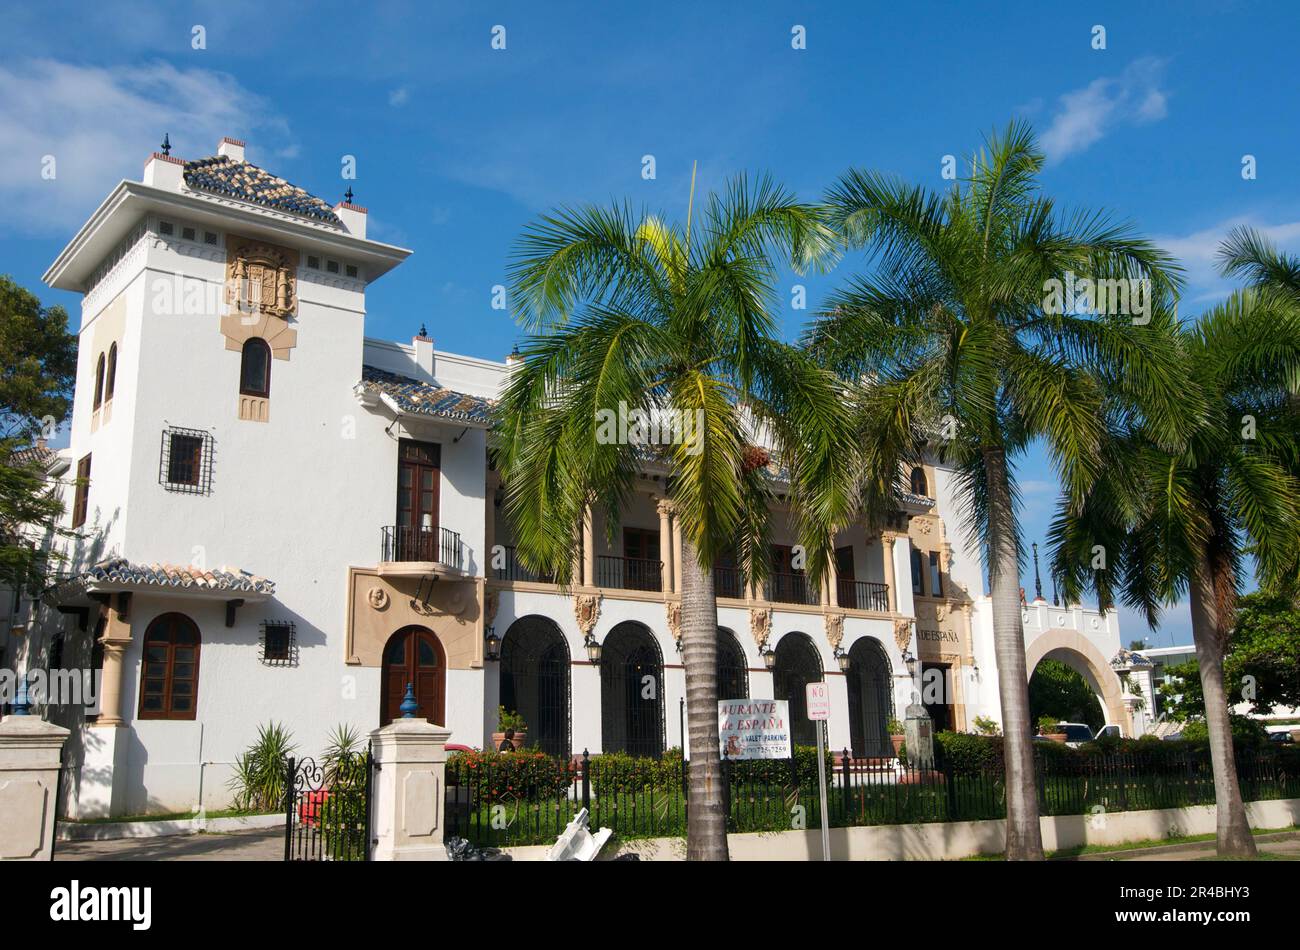 Colonial style restaurant, Old Town, San Juan, Puerto Rico Stock Photo